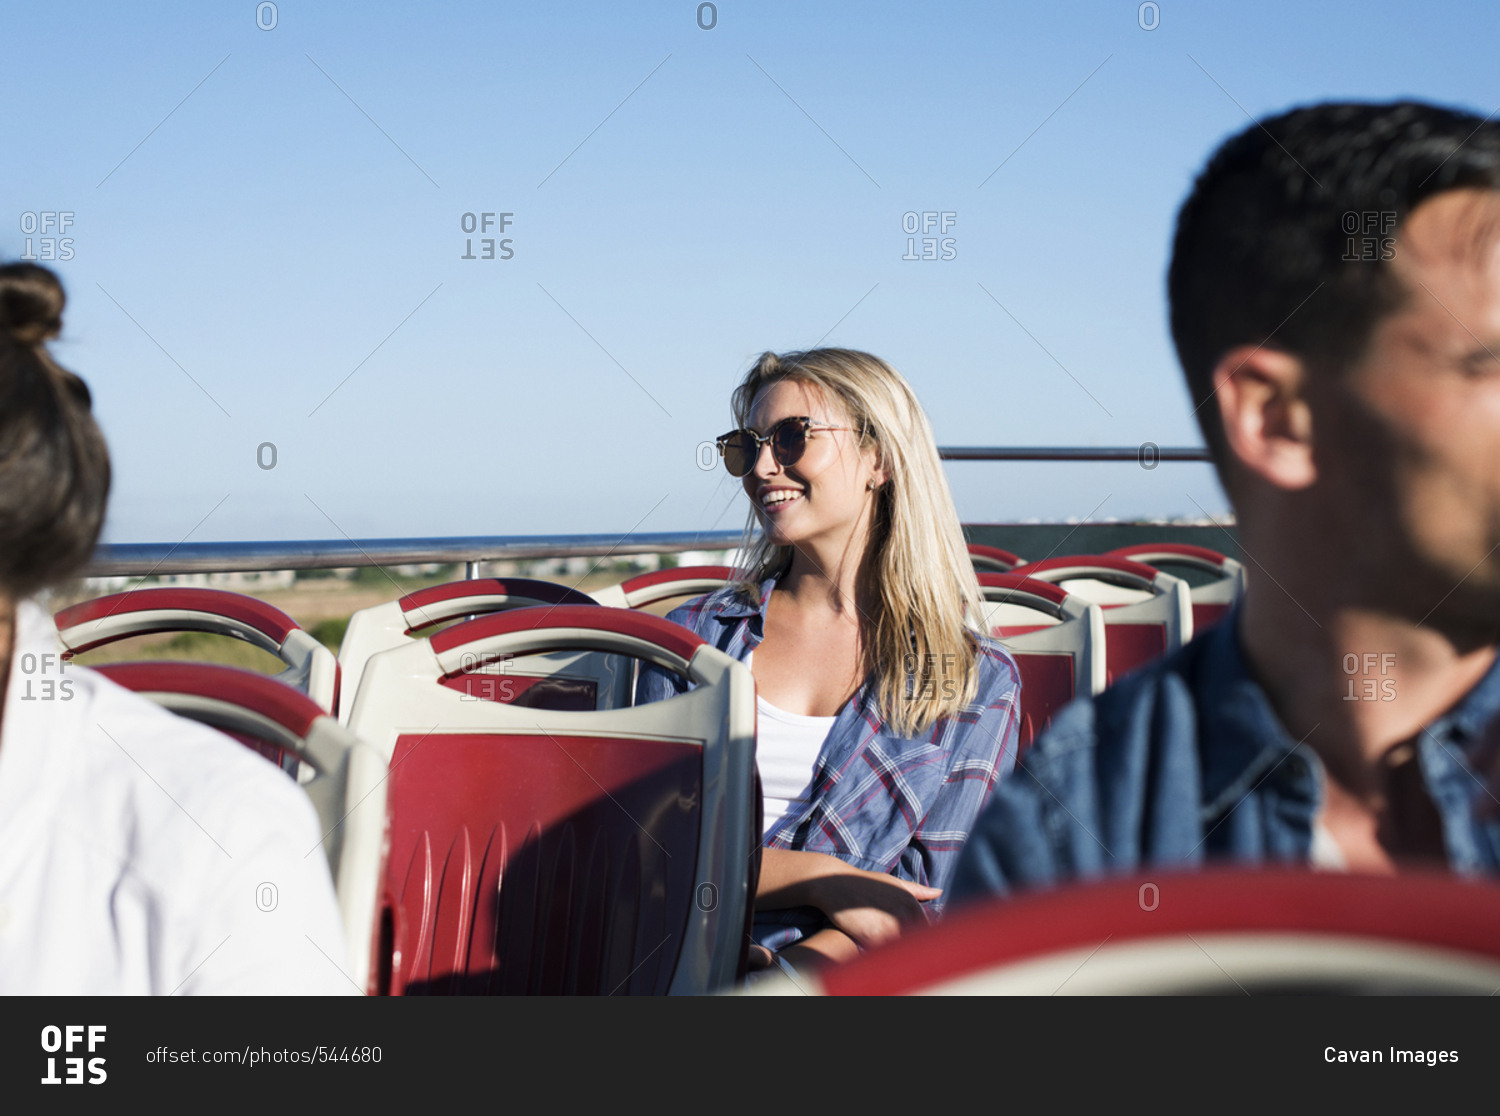 Tourists traveling in double-decker bus against clear blue sky